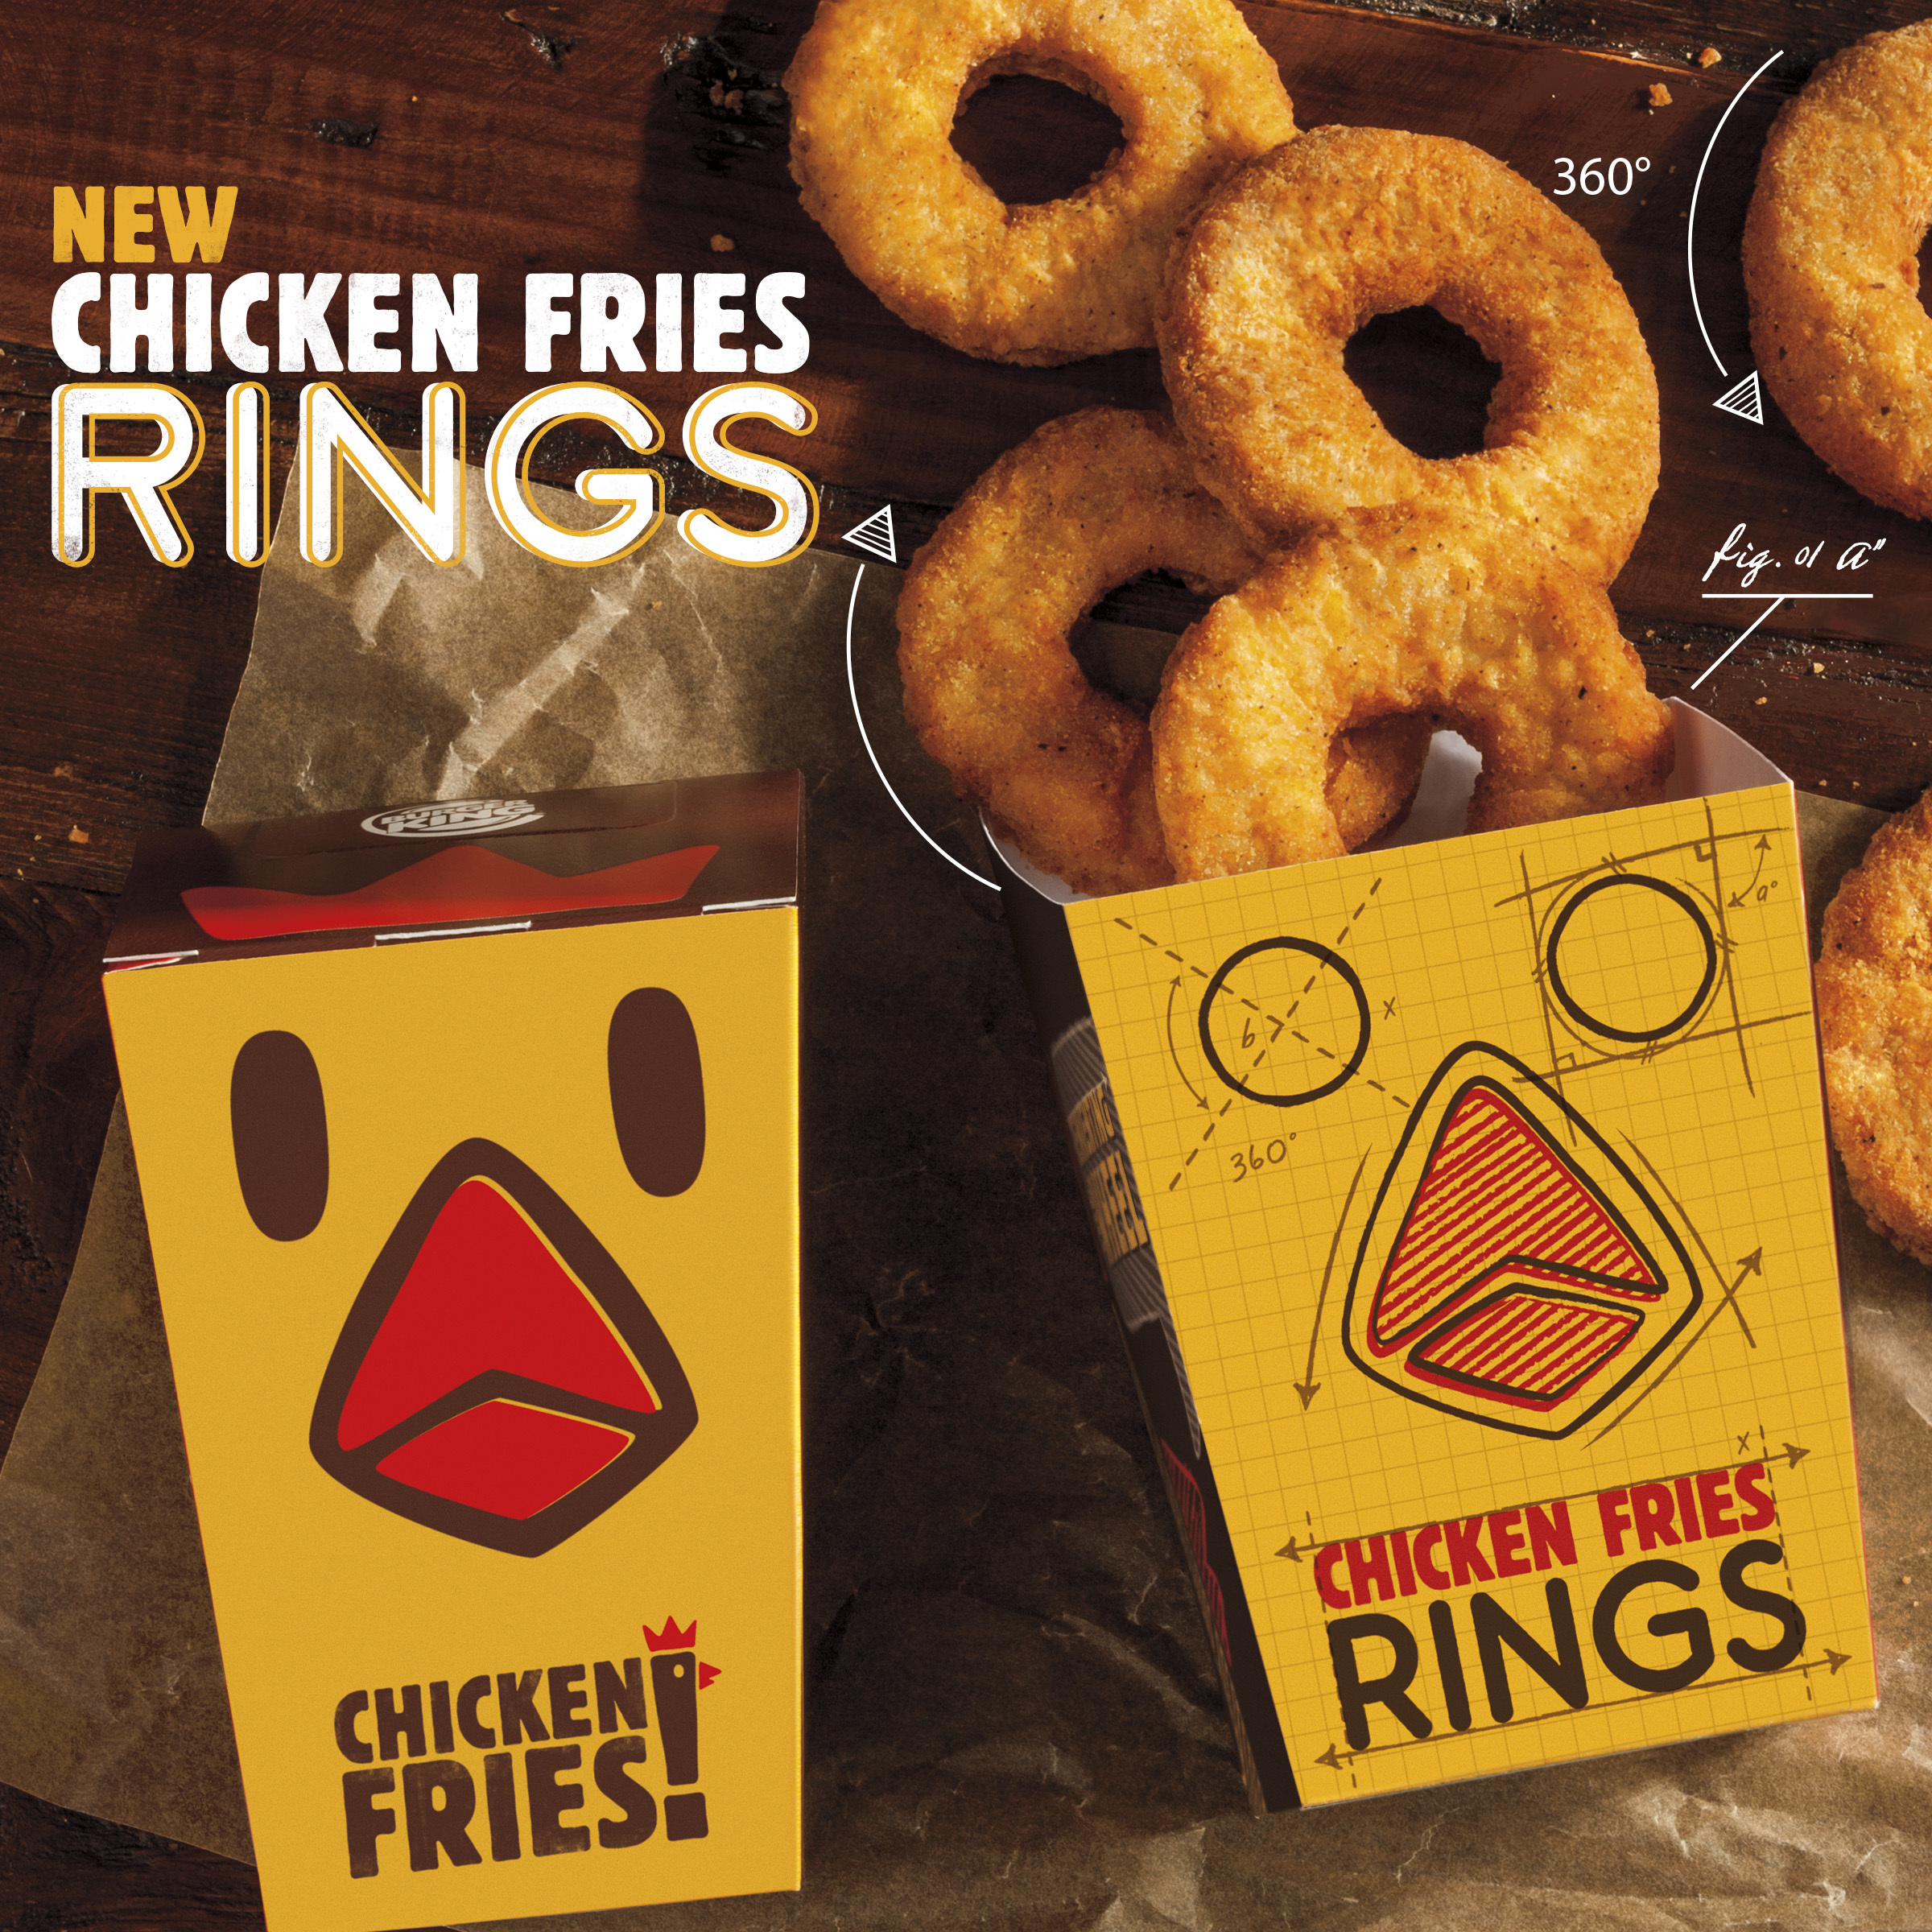 burger king chicken nuggets and fries